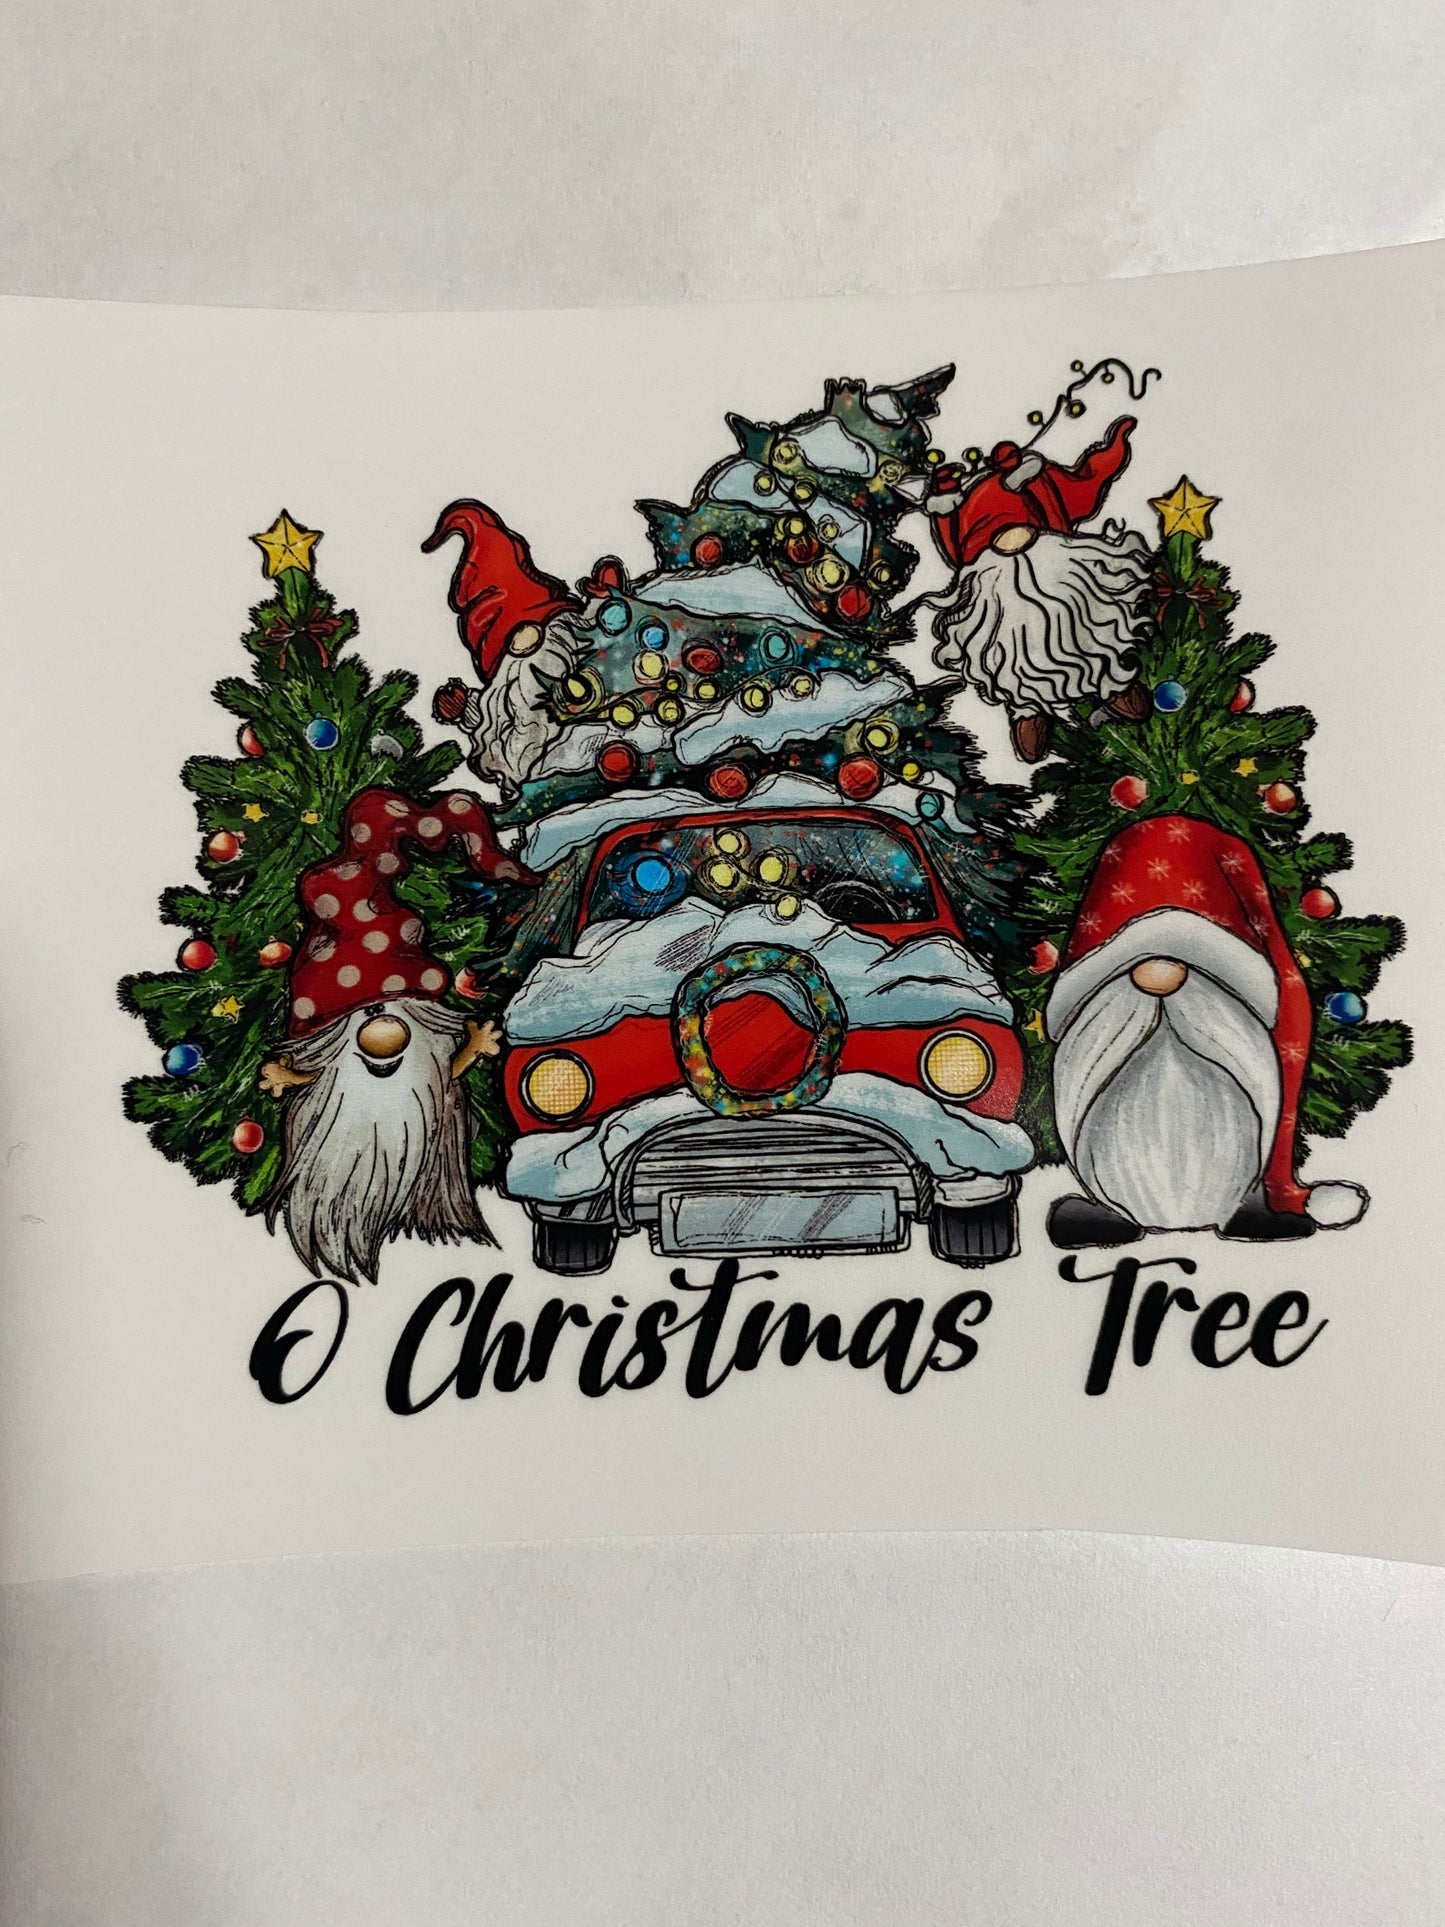 Holiday/Christmas Decals